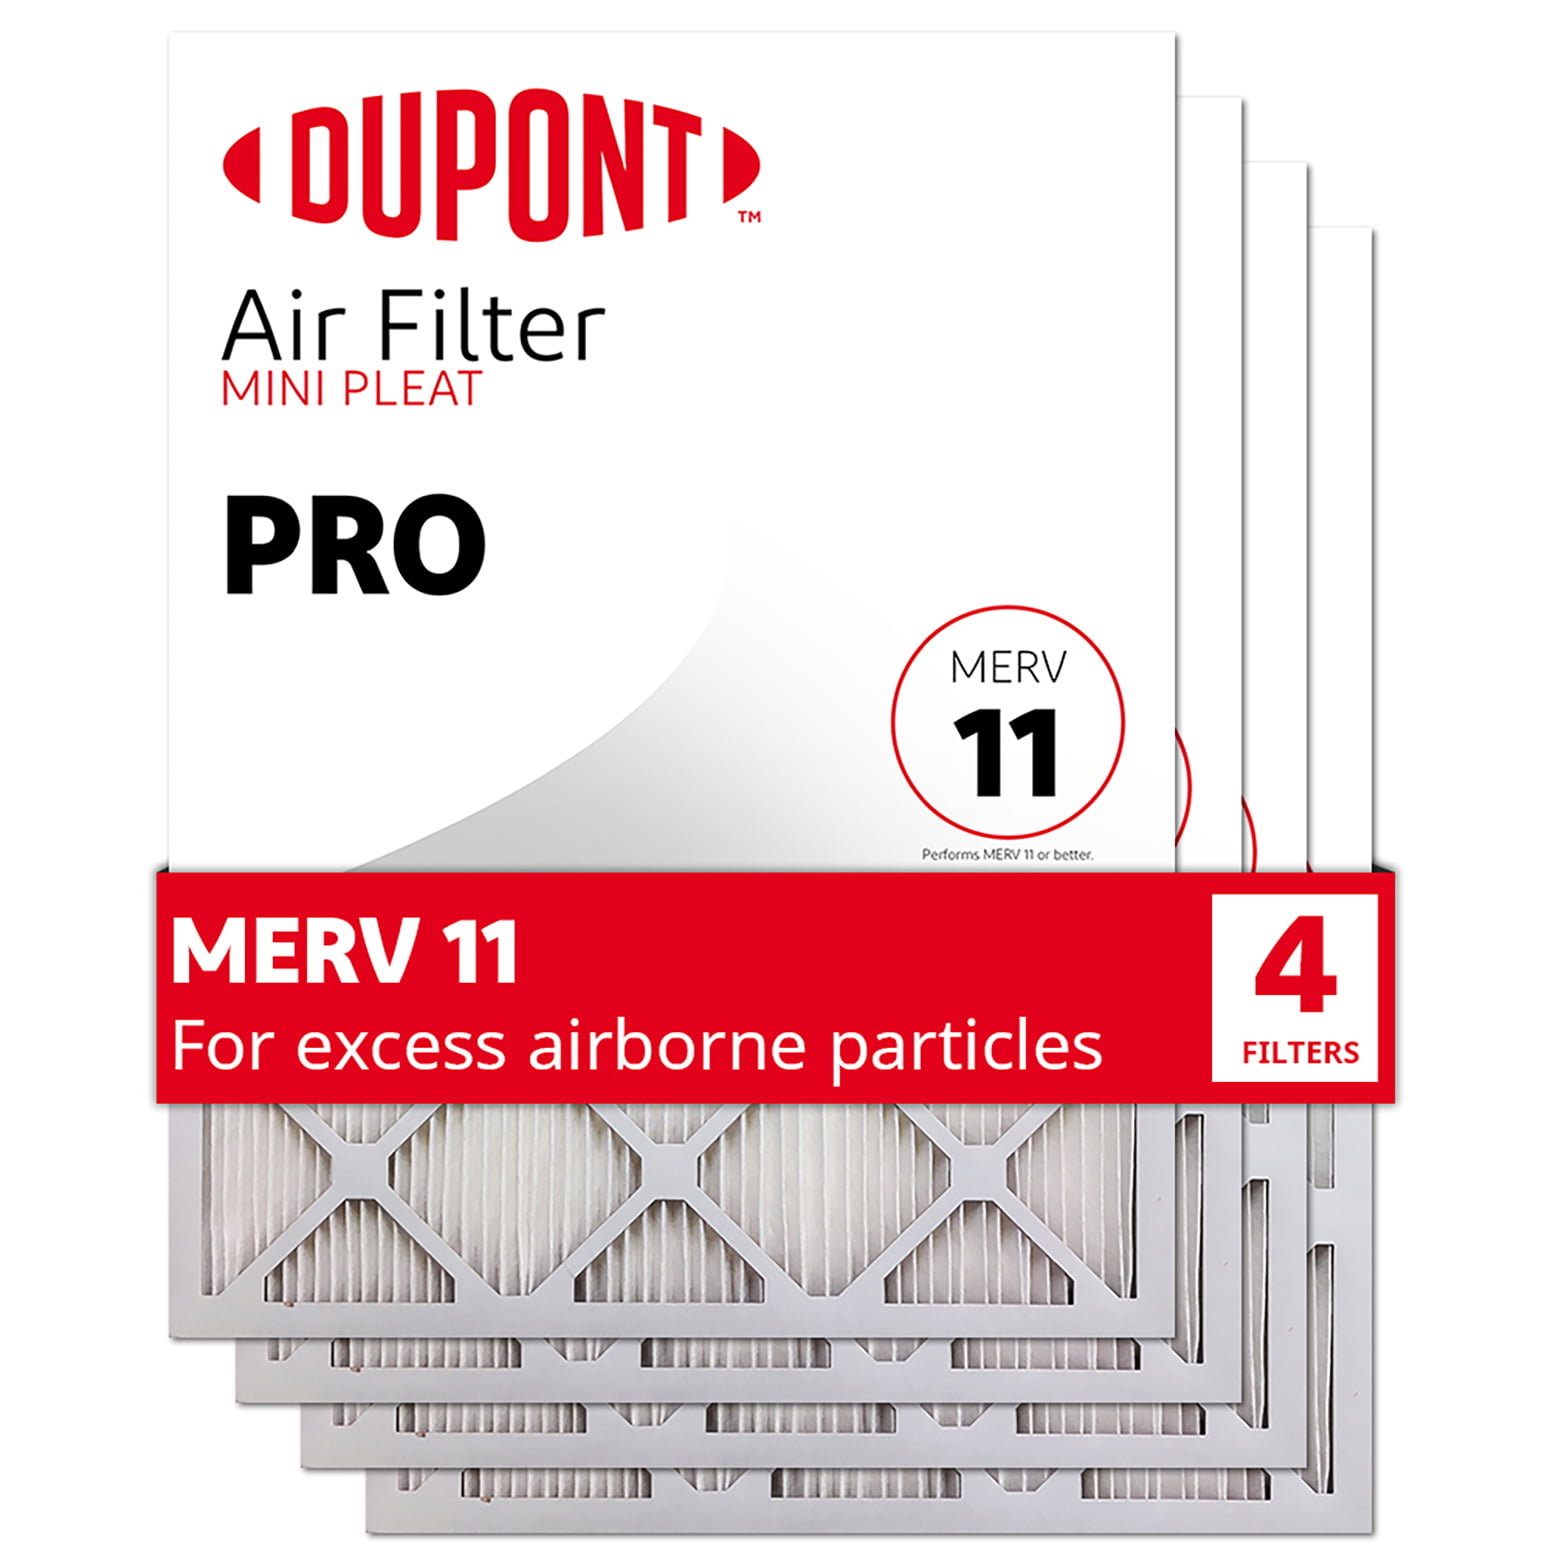 20x24x1 DuPont Family Care Pollen & Allergen MERV 8 Air Filters Case of 12 